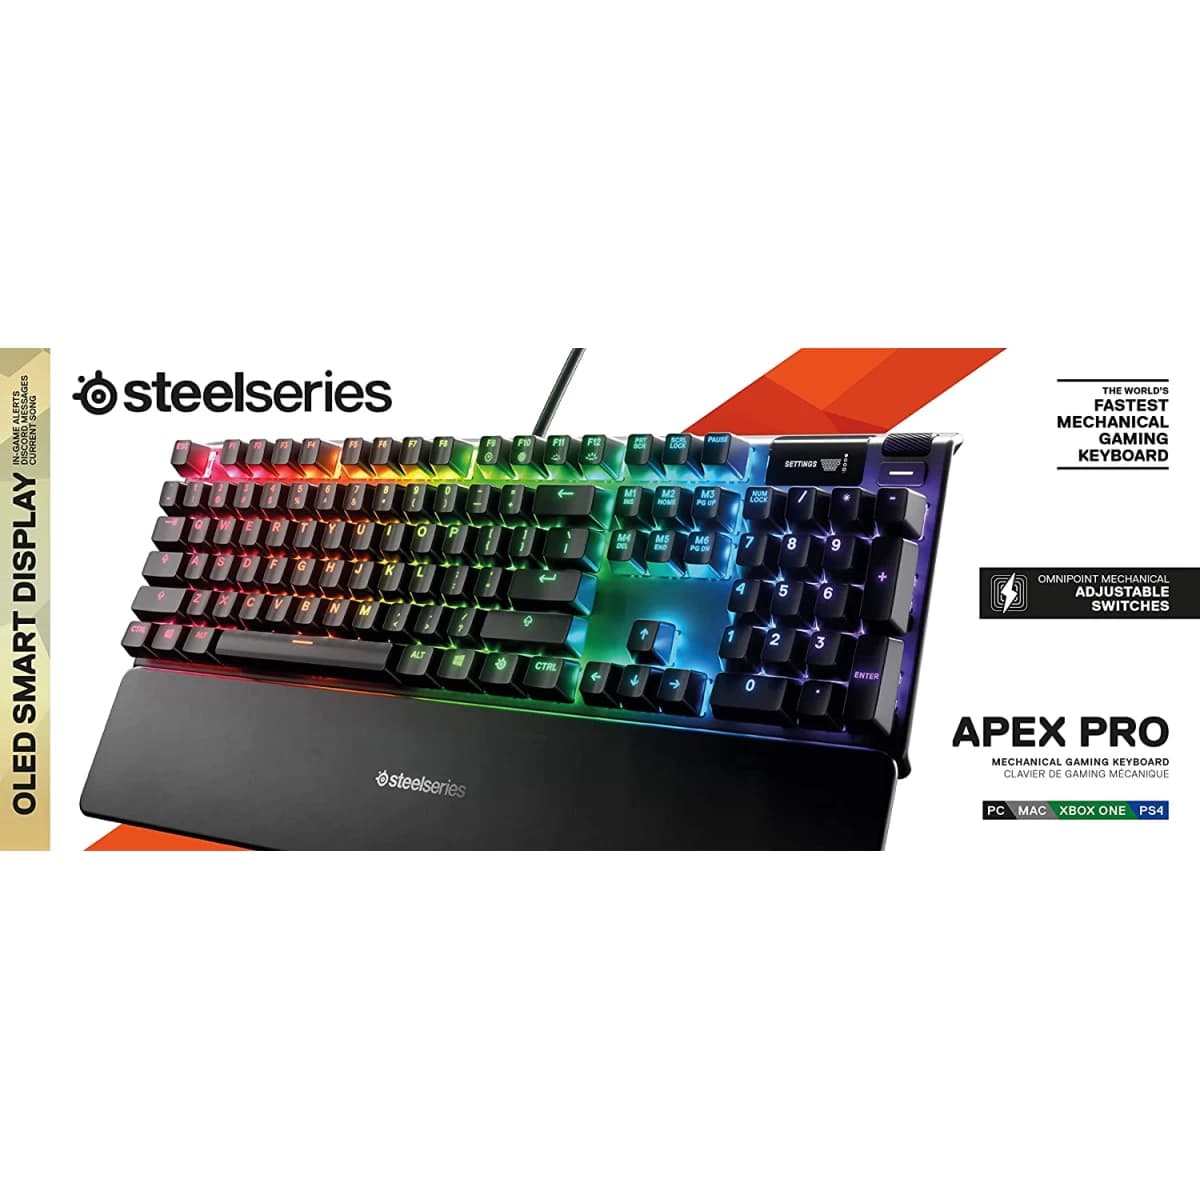 Apex Pro Mechanical Keyboard with Adjustable Actuation Keys from SteelSeries